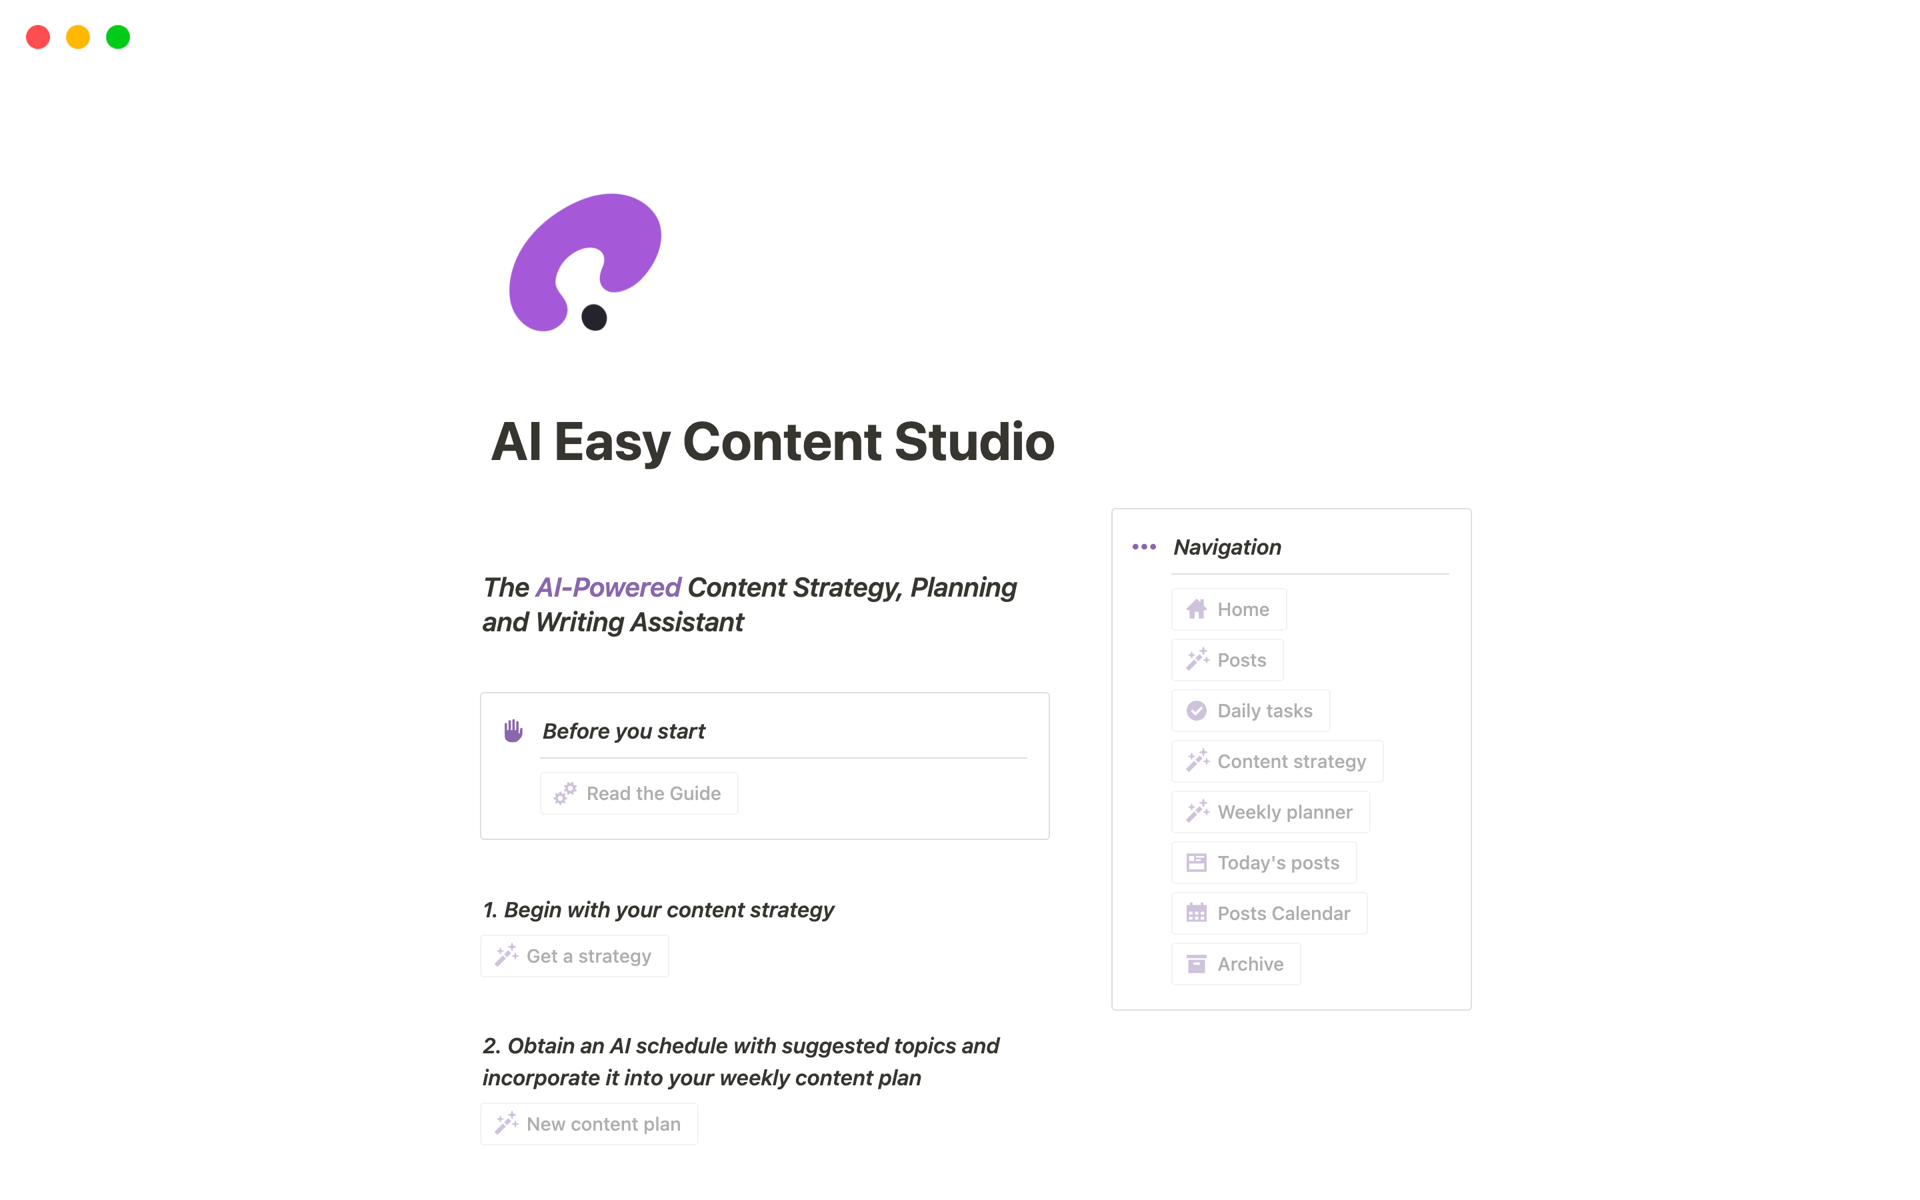 You'll get an ultimate AI-powered solution for your content planning & creation!